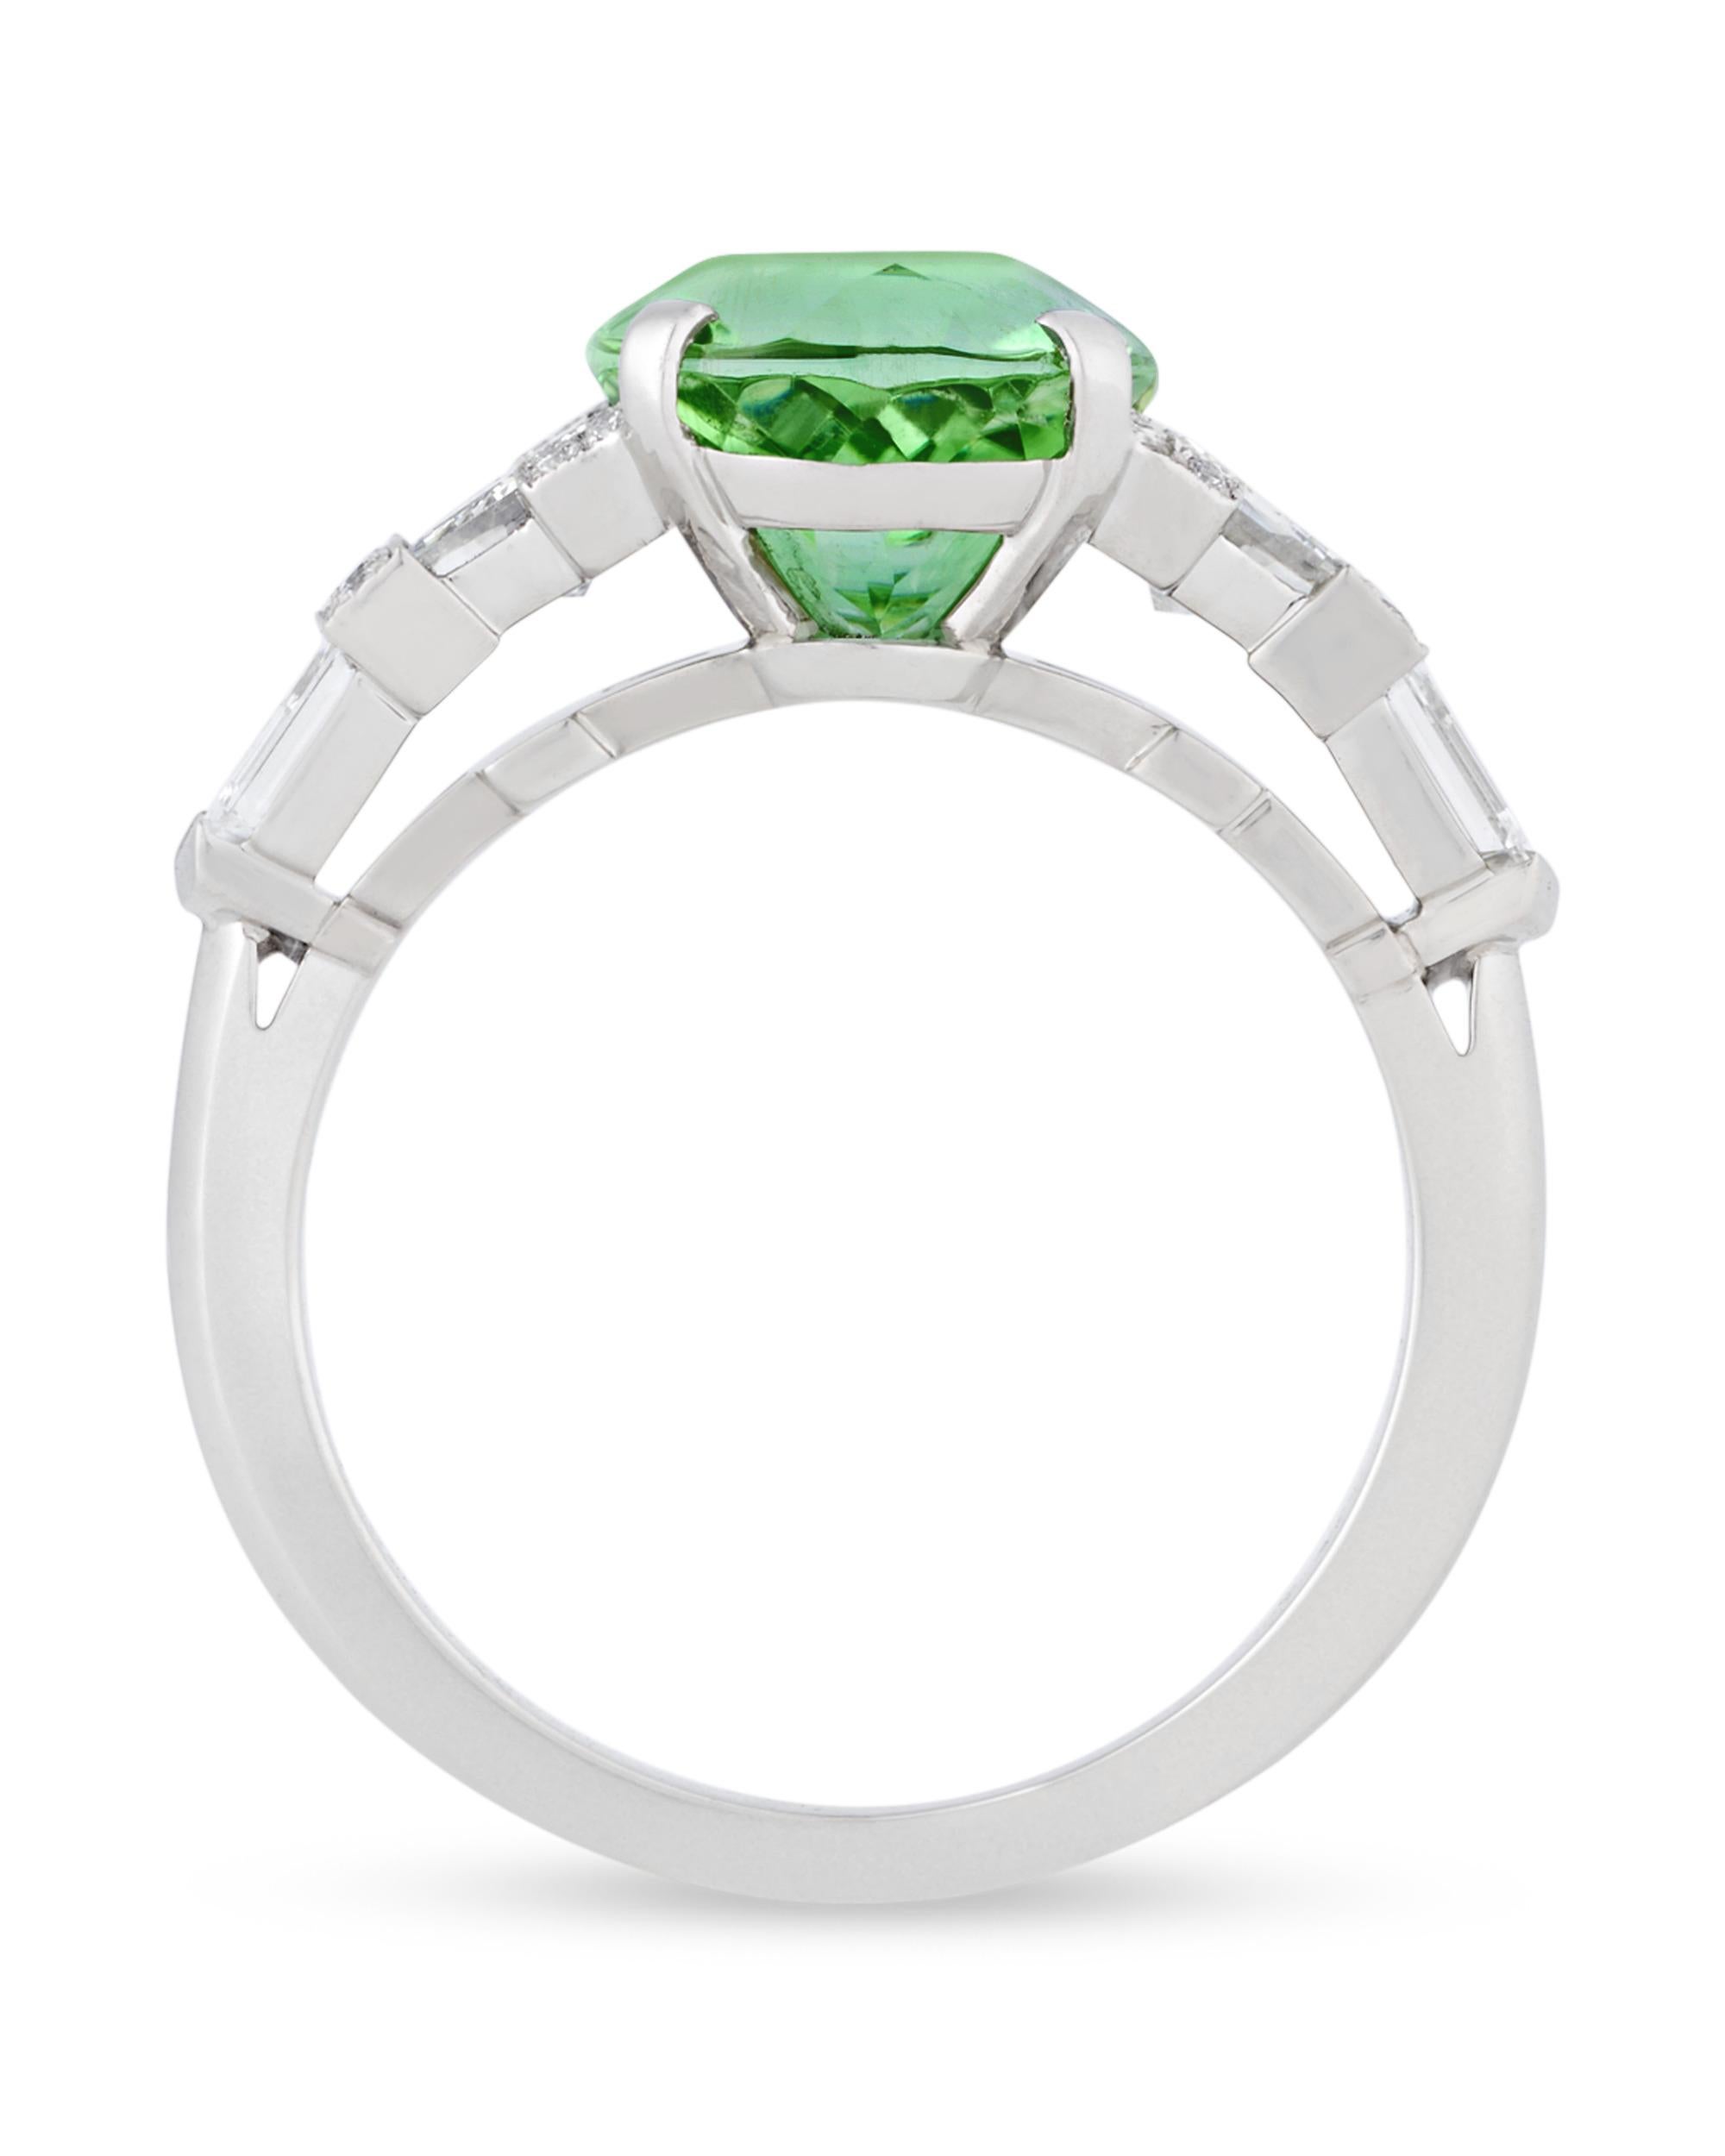 A luminous green 3.65-carat Paraiba tourmaline centers this elegant ring from famed jeweler Raymond Yard. First discovered in 1989, the Paraiba tourmaline is one of the world’s rarest and most vibrant gemstones. It is thanks to their rare chemical